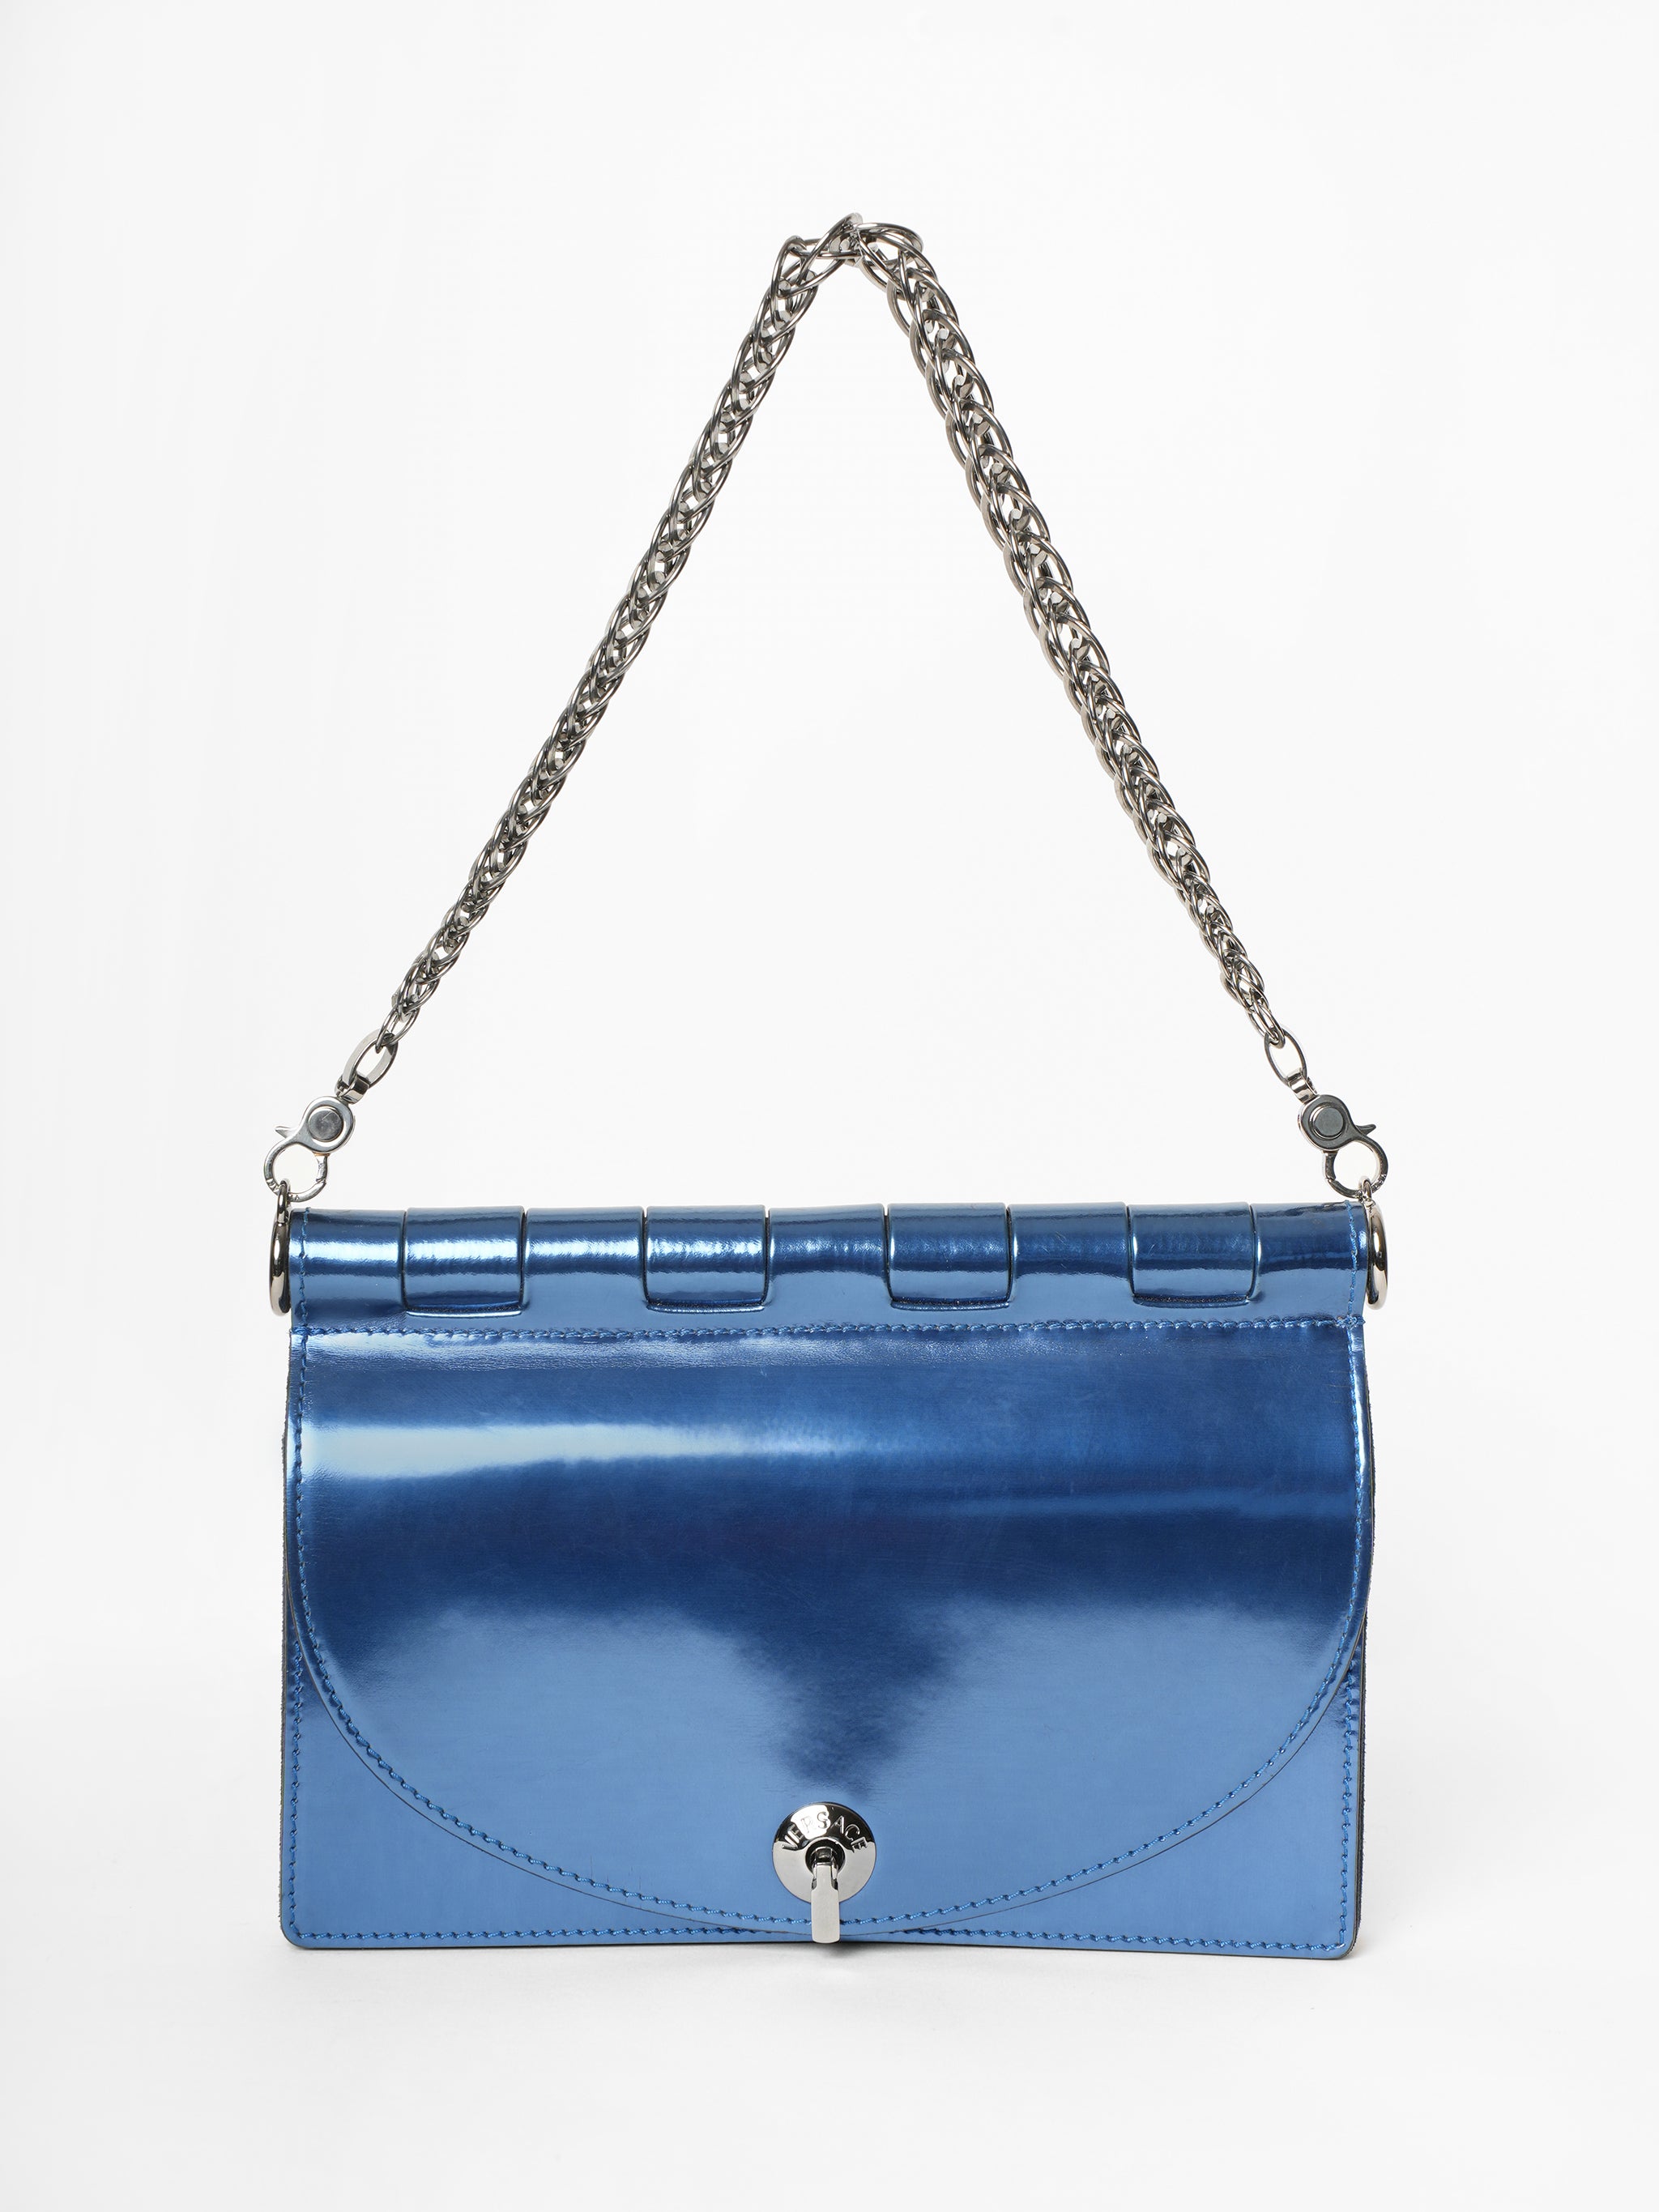 Versace Electric patent leather blue fold over bag with palladium chai